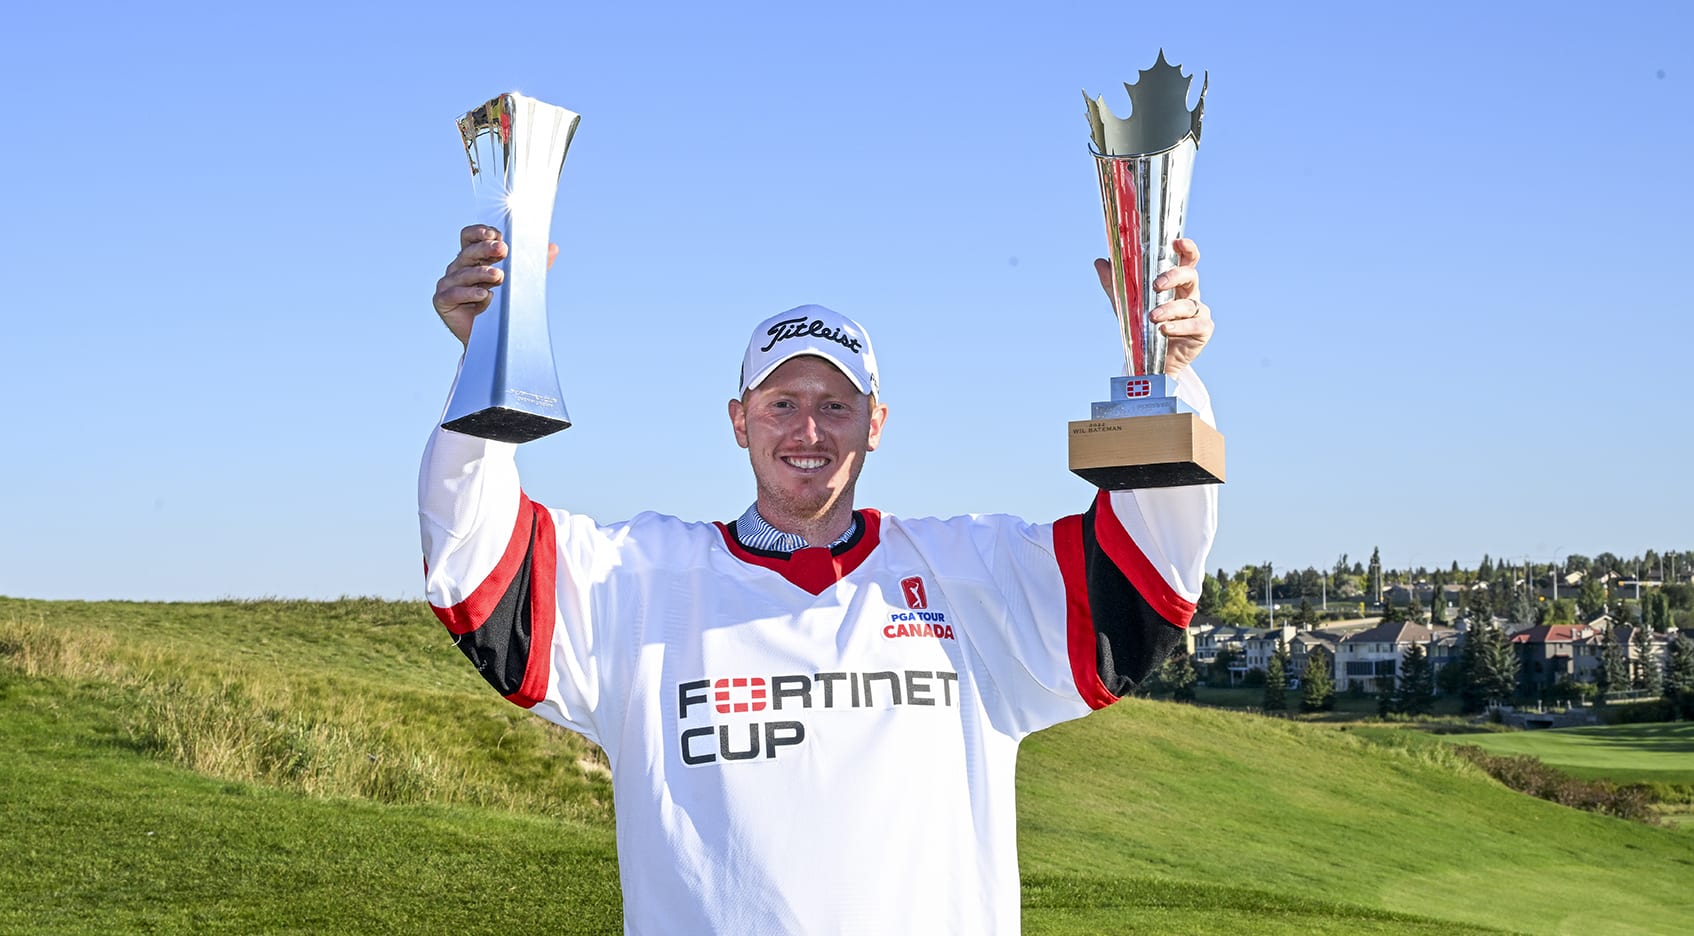 Springer wins Fortinet Cup Championship, secures Player of the Year honors